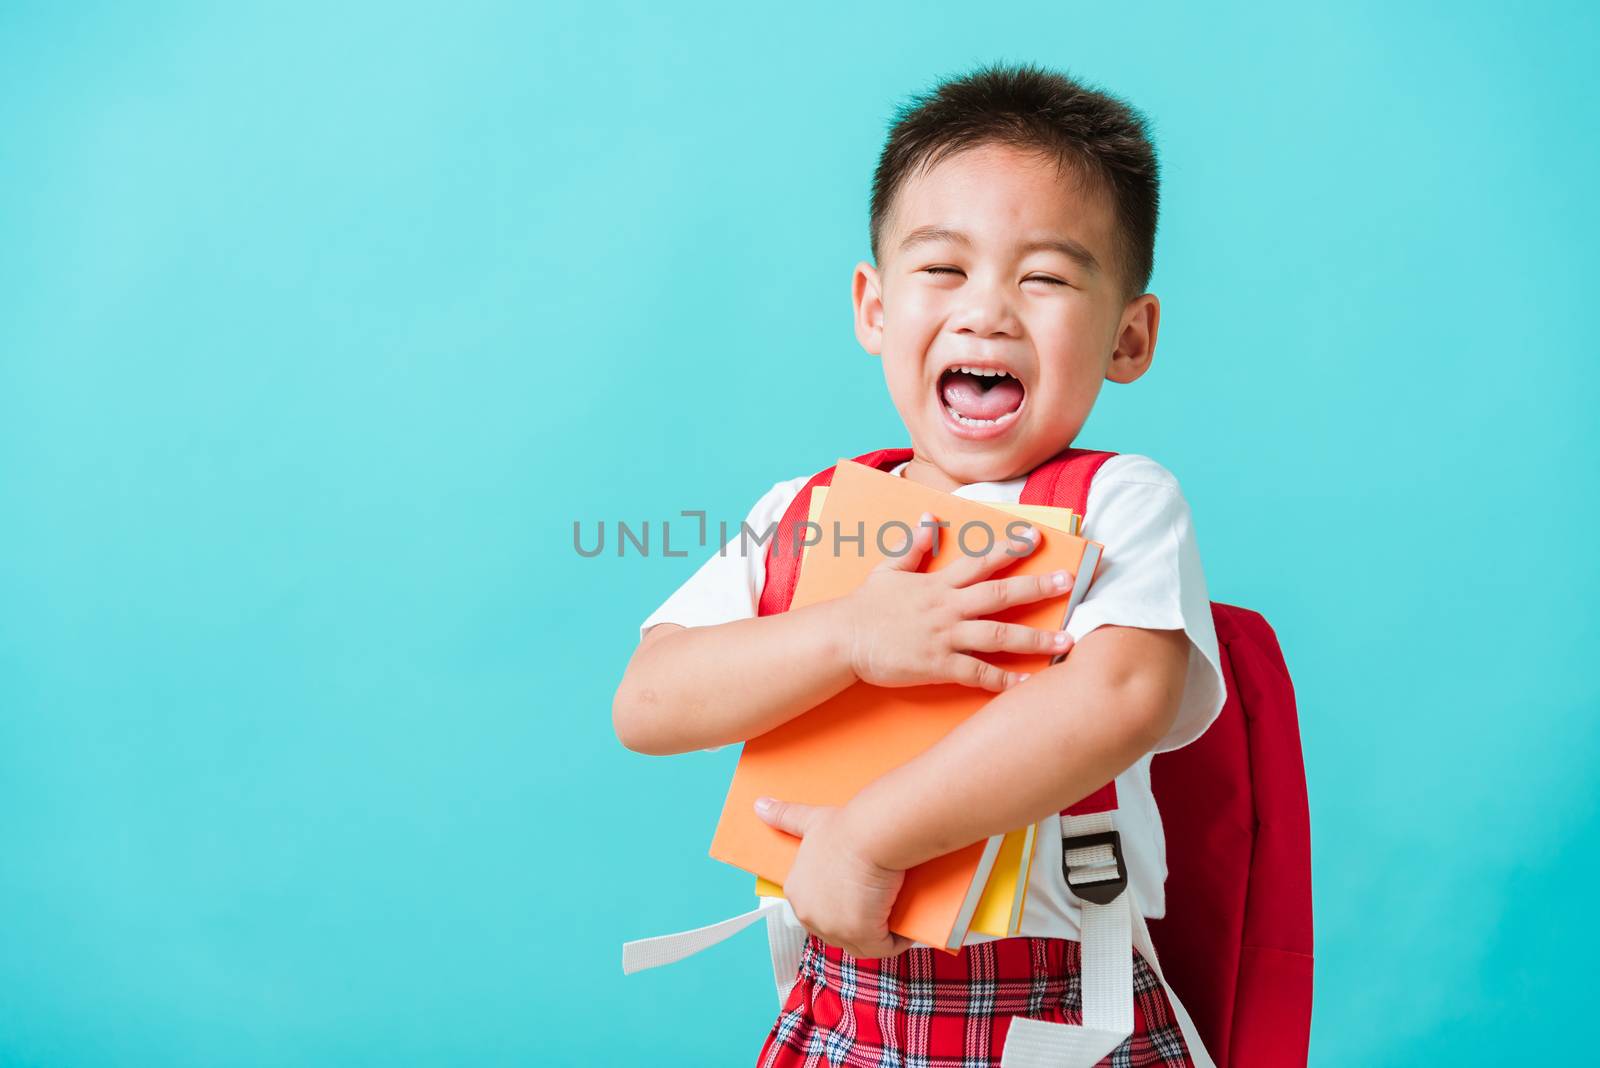 Back to school concept. Portrait Asian happy funny cute little child boy smiling and laugh hug books, studio shot isolated blue background. Kid from preschool kindergarten with school bag education